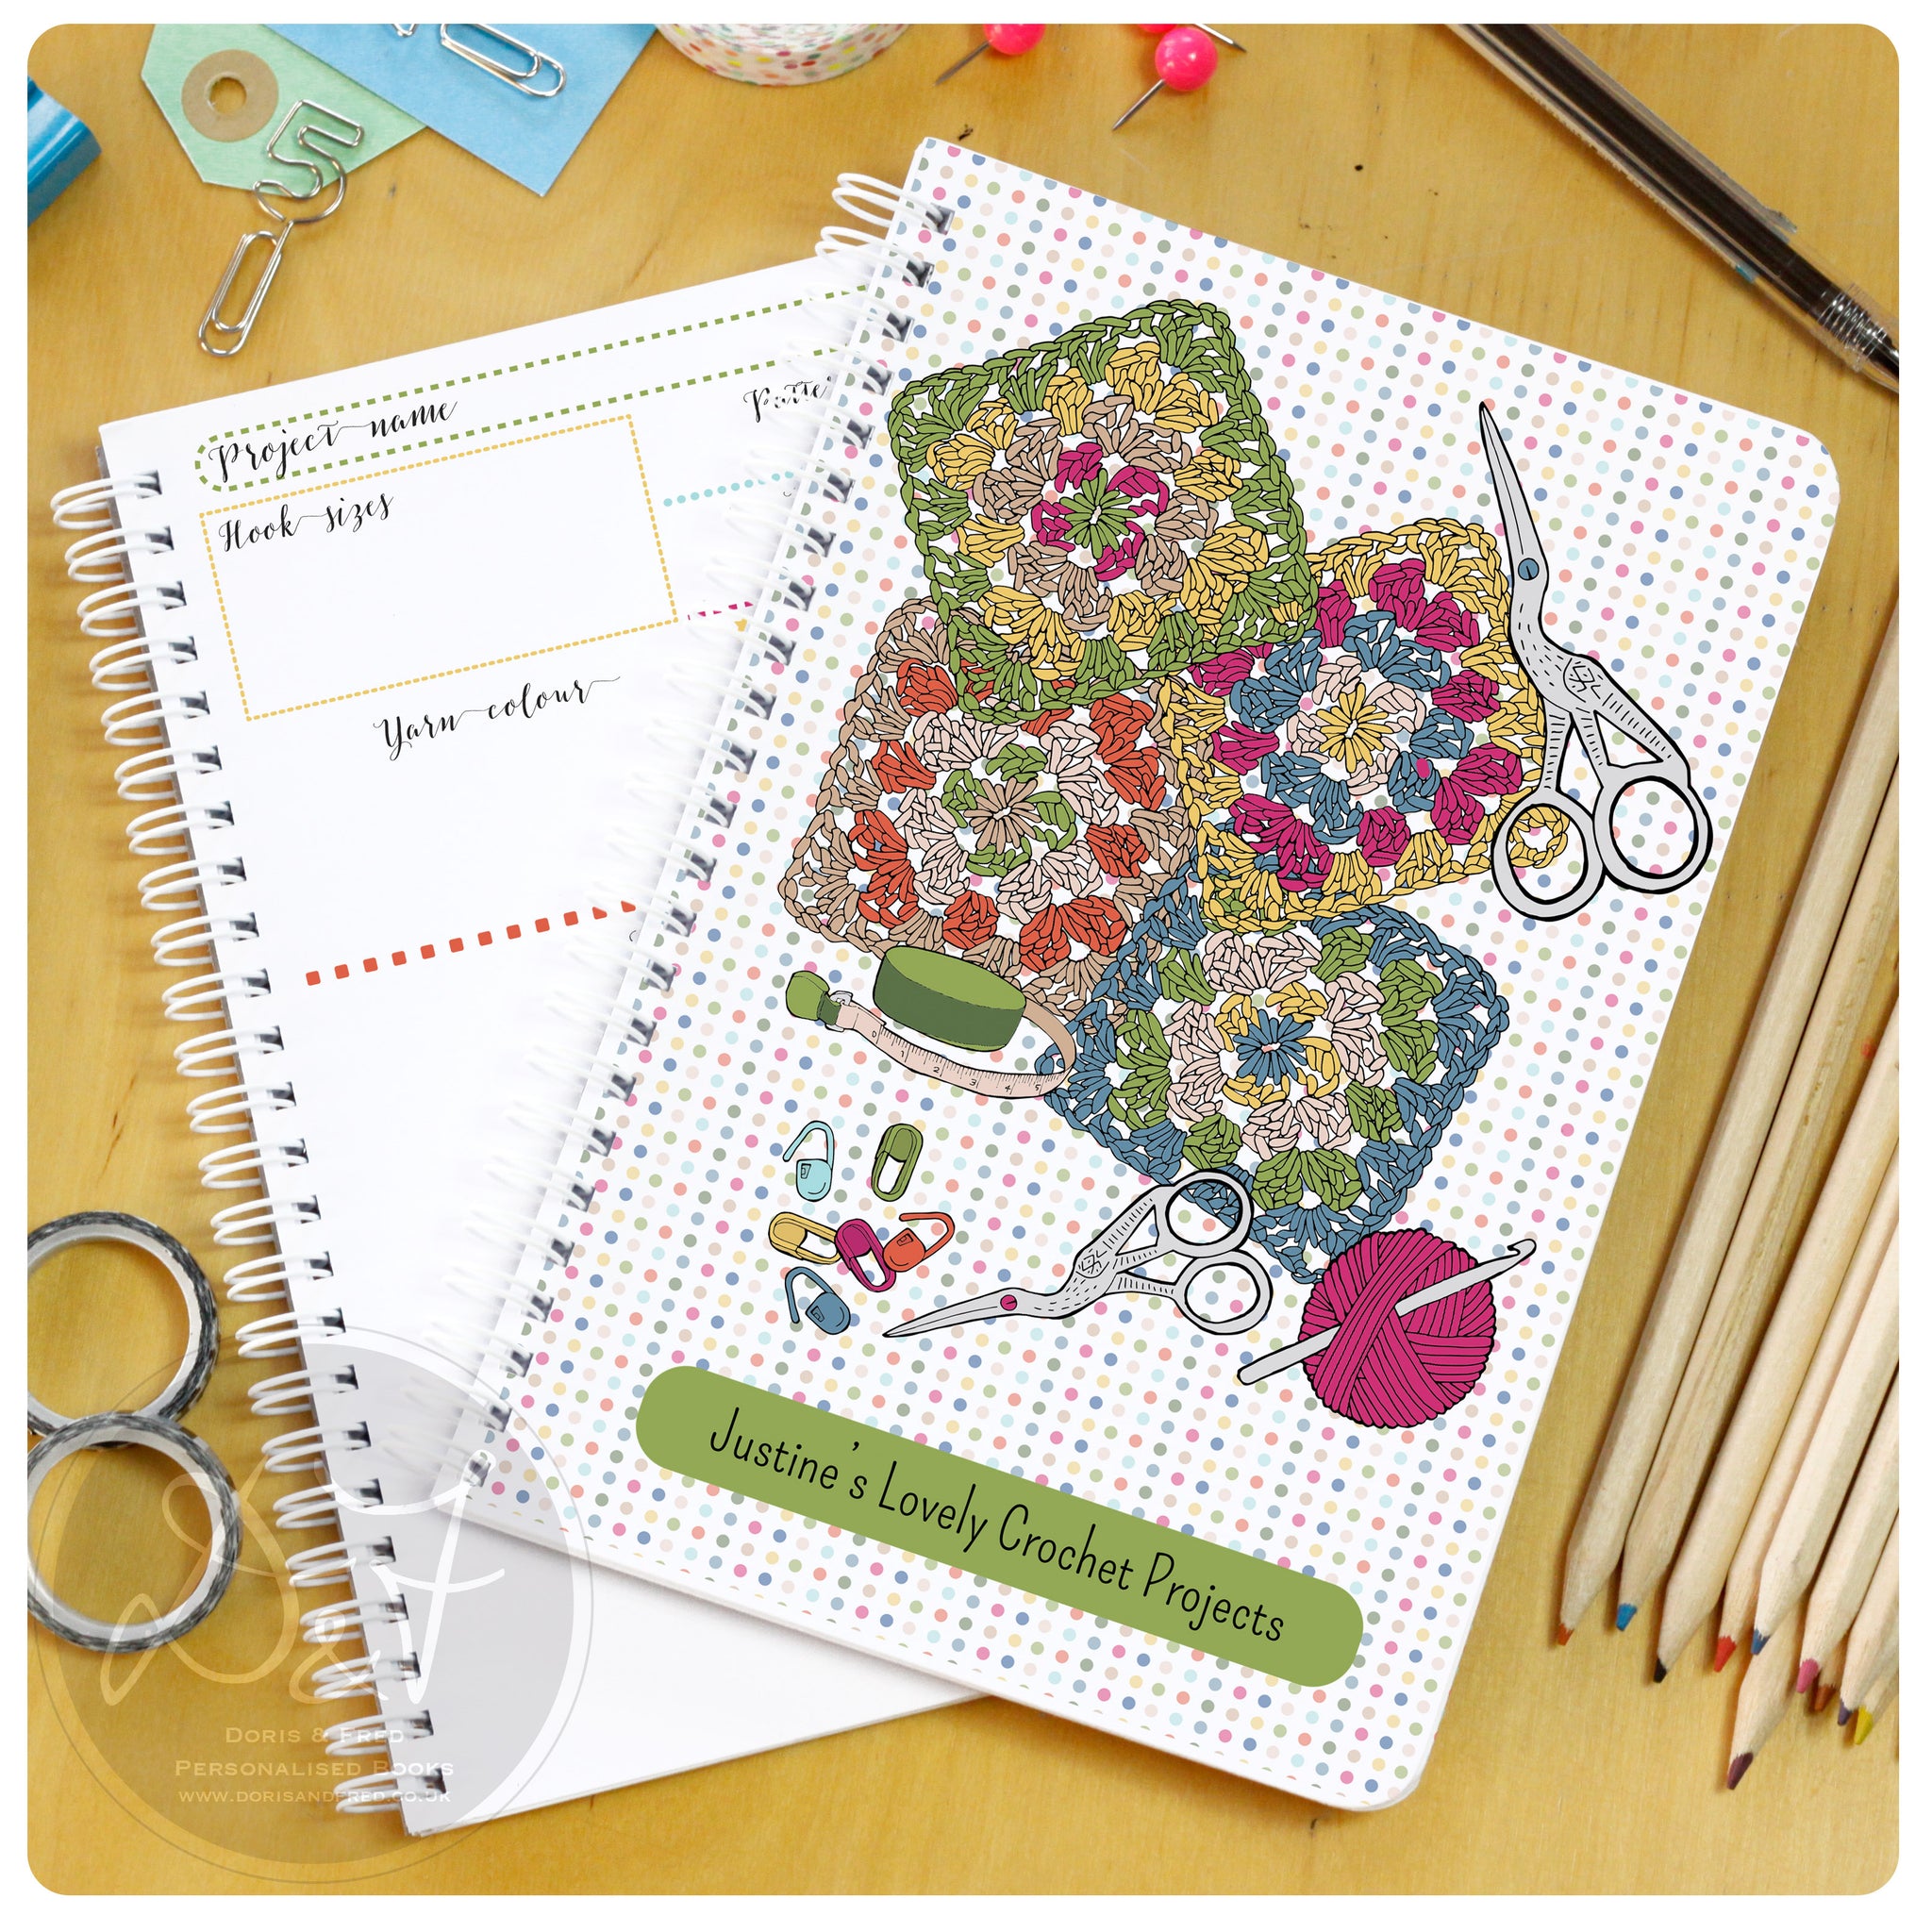 Crochet Journal Log Book: Crochet Project Planner | Organise 144 Crochet  Projects & To Keep Tracking and Records: Patterns, Designs, Crochet  Stitches